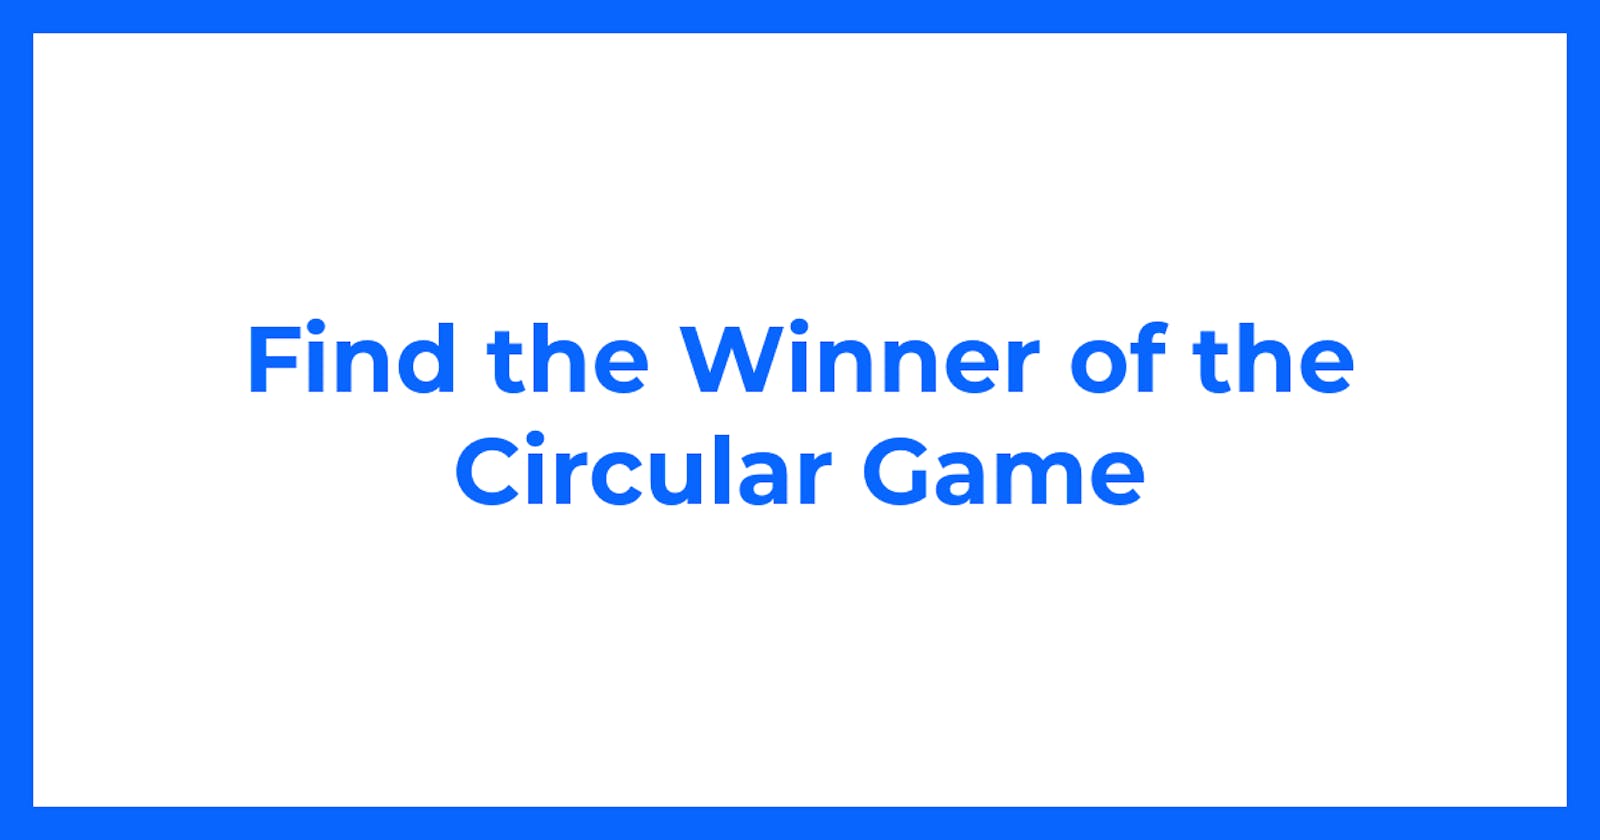 Find the Winner of the Circular Game